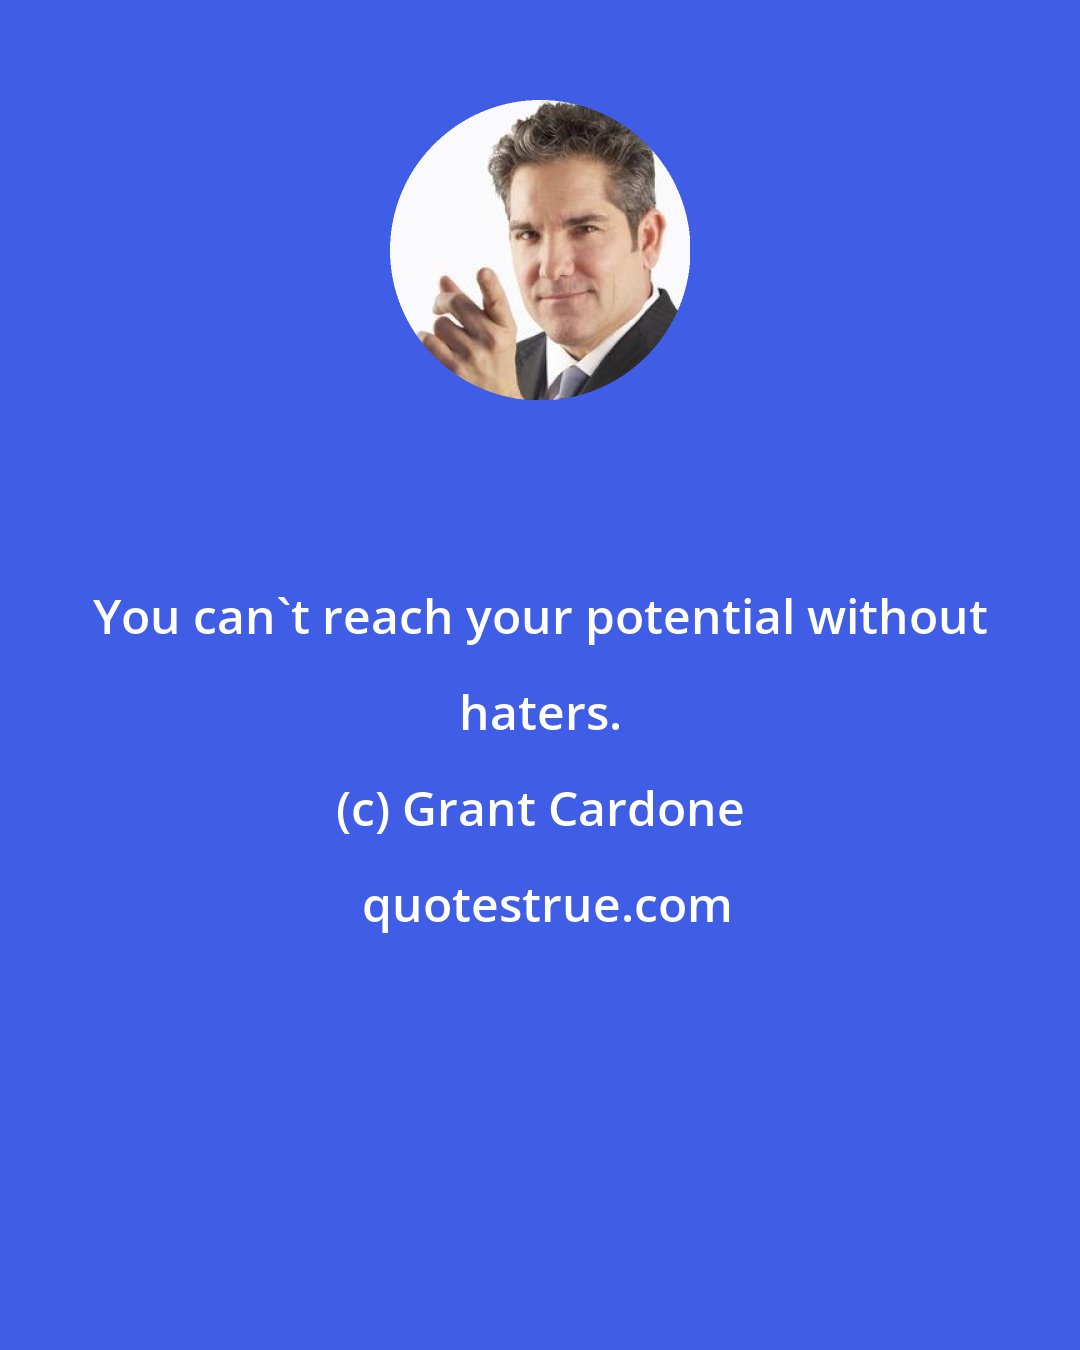 Grant Cardone: You can't reach your potential without haters.